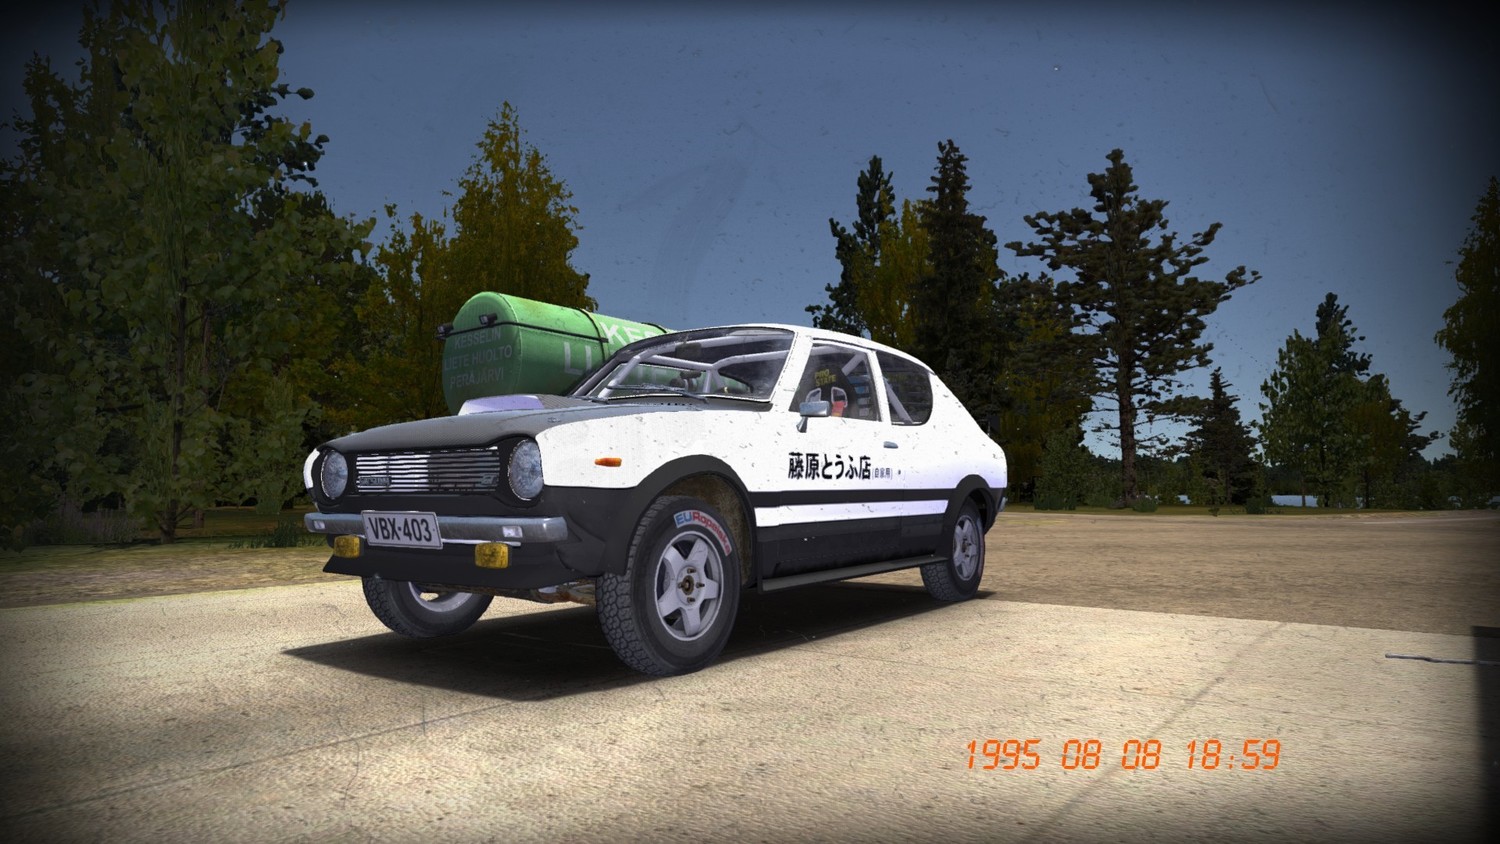 My Summer Car: SaveGame (Satsuma rally ready, 8350 marks, numbers received)